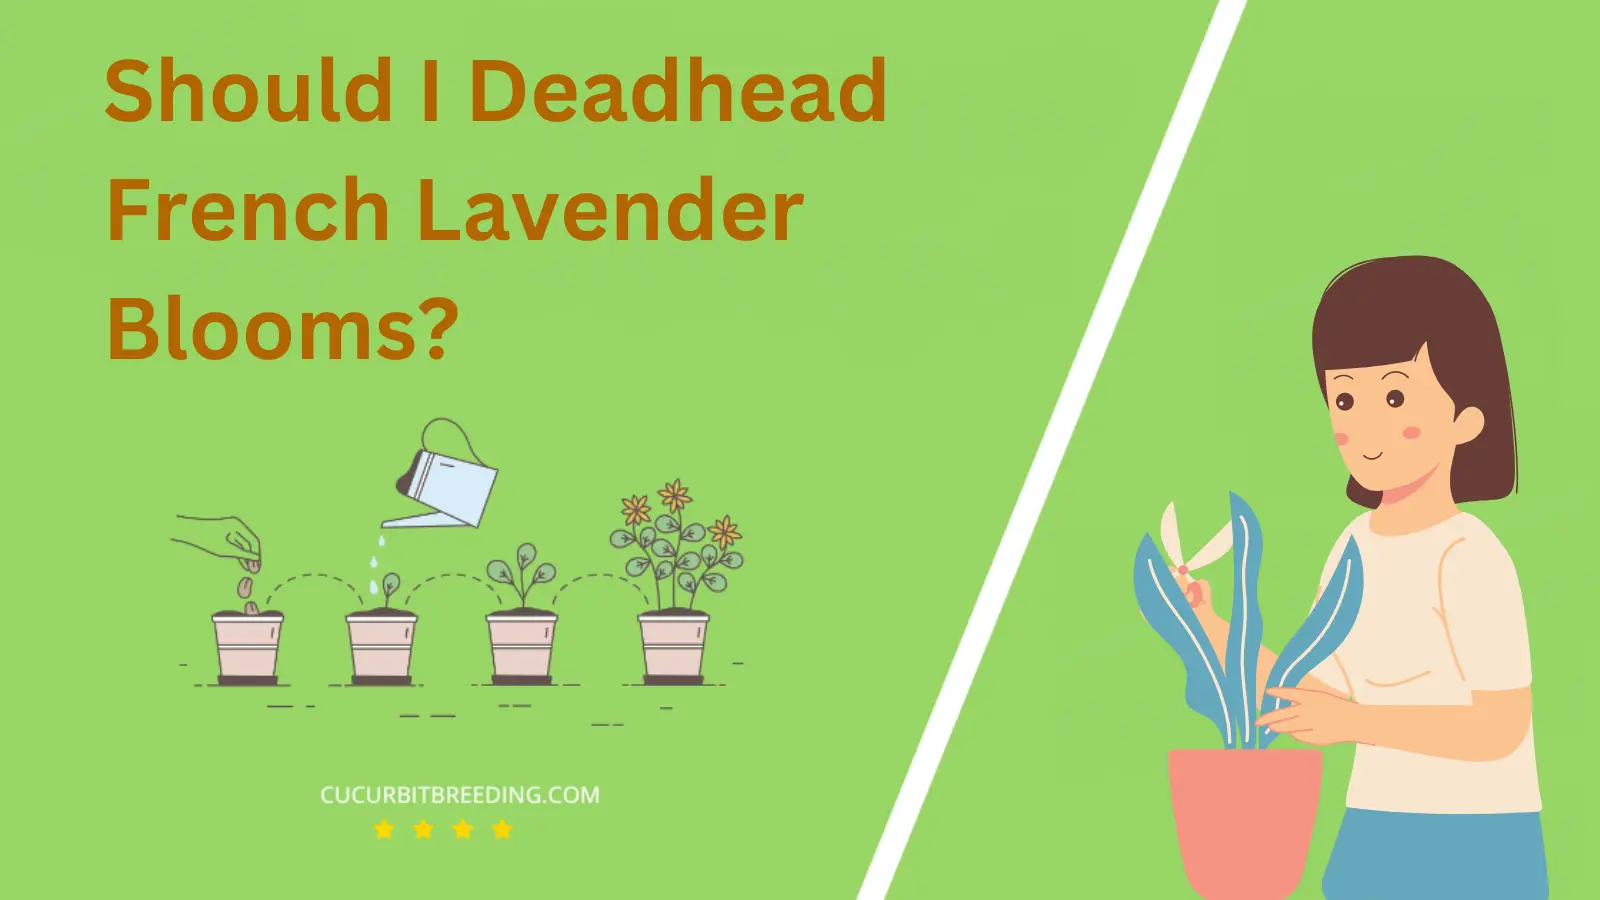 Should I Deadhead French Lavender Blooms?